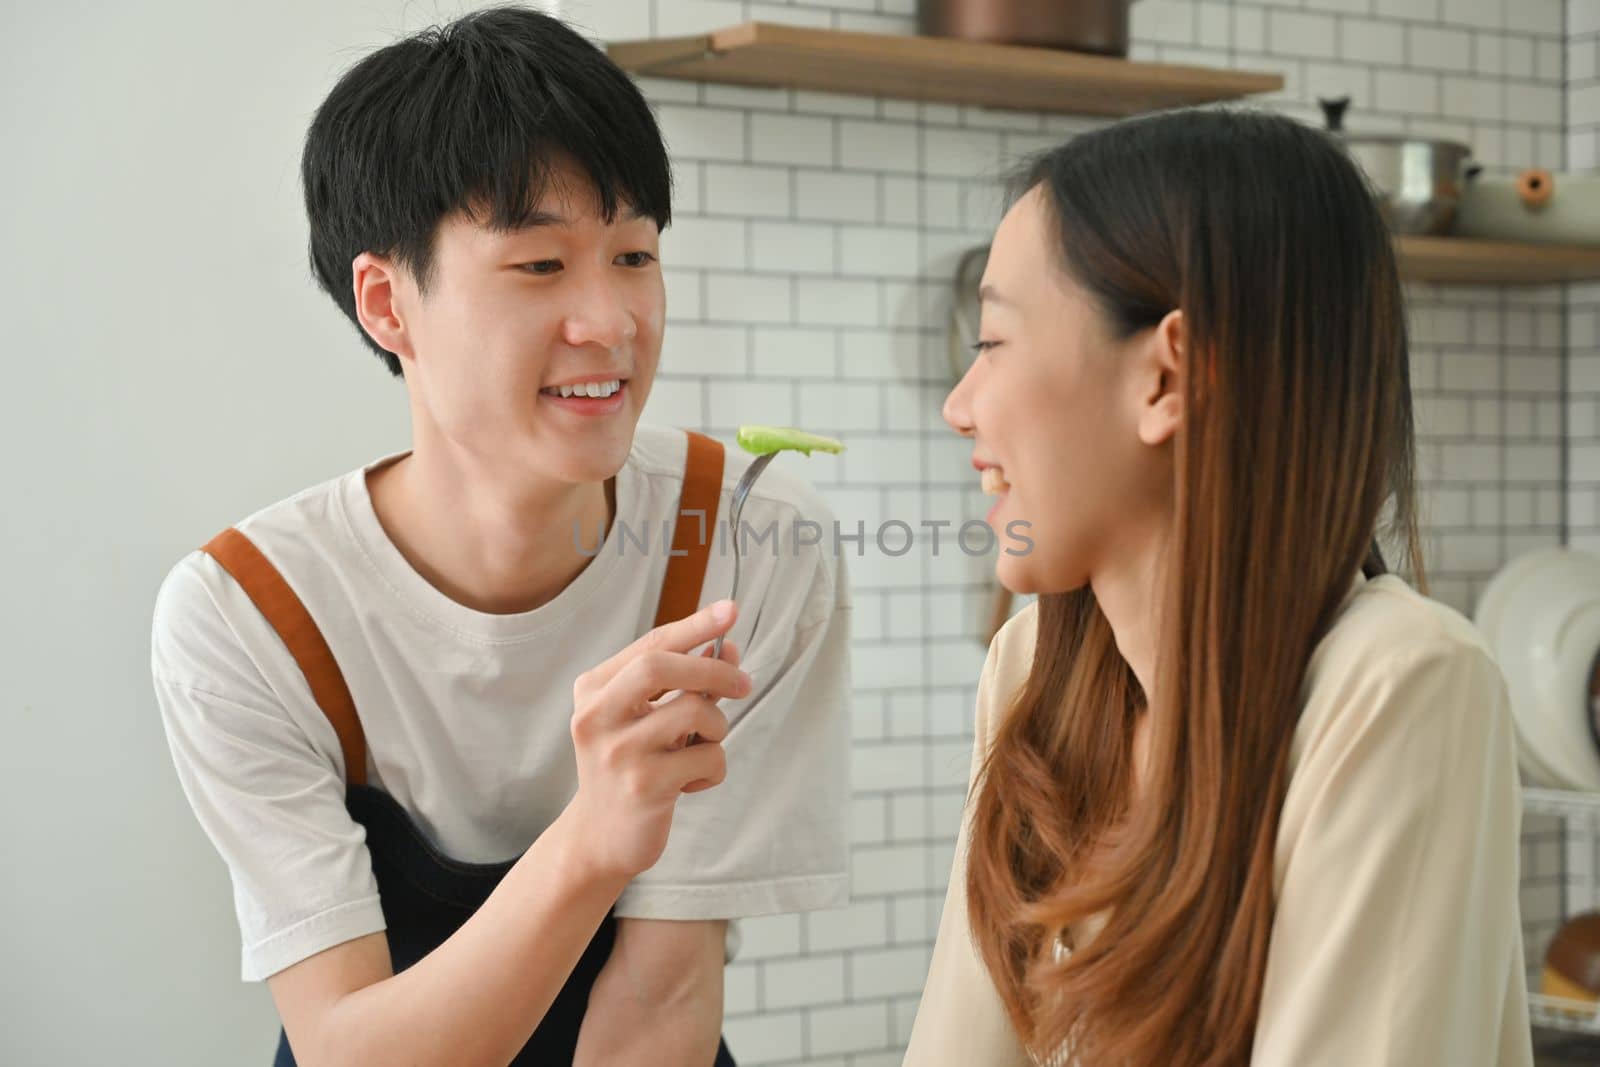 Smiling asian man feeding vegetable salad to his girlfriend. Family moments, healthy lifestyle concept by prathanchorruangsak